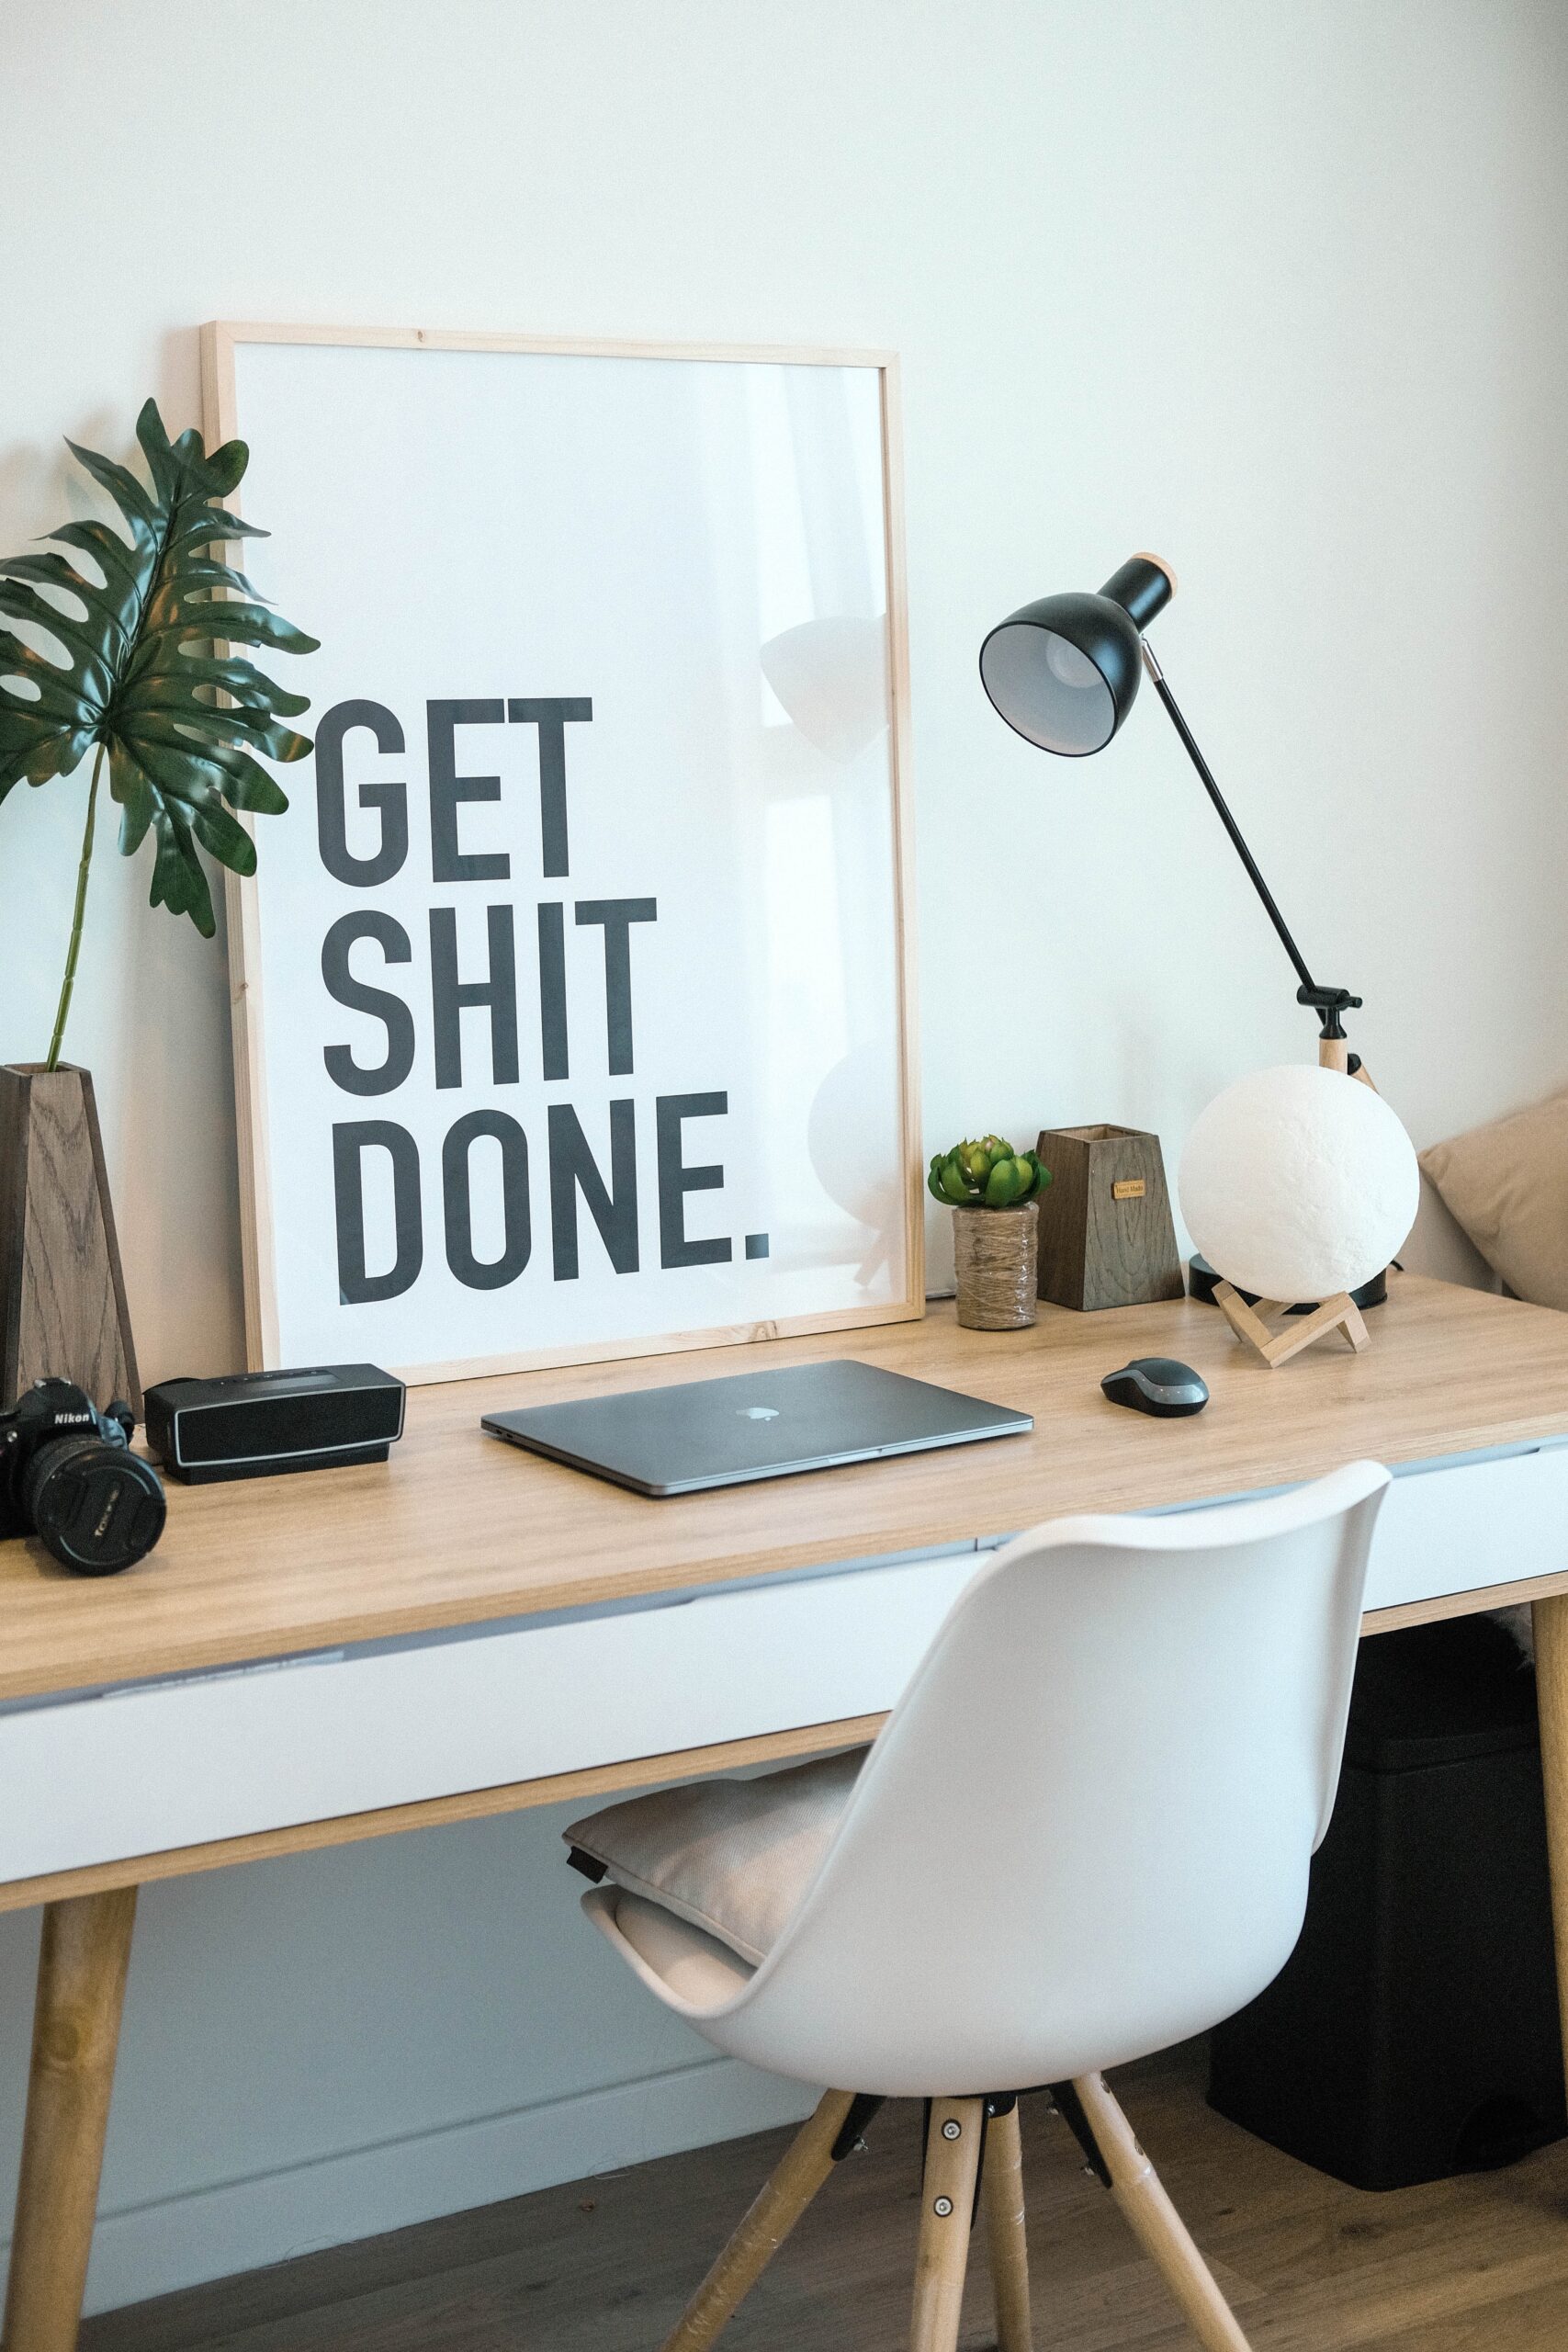 10 Things You Need to Know to Get Sh*t Done